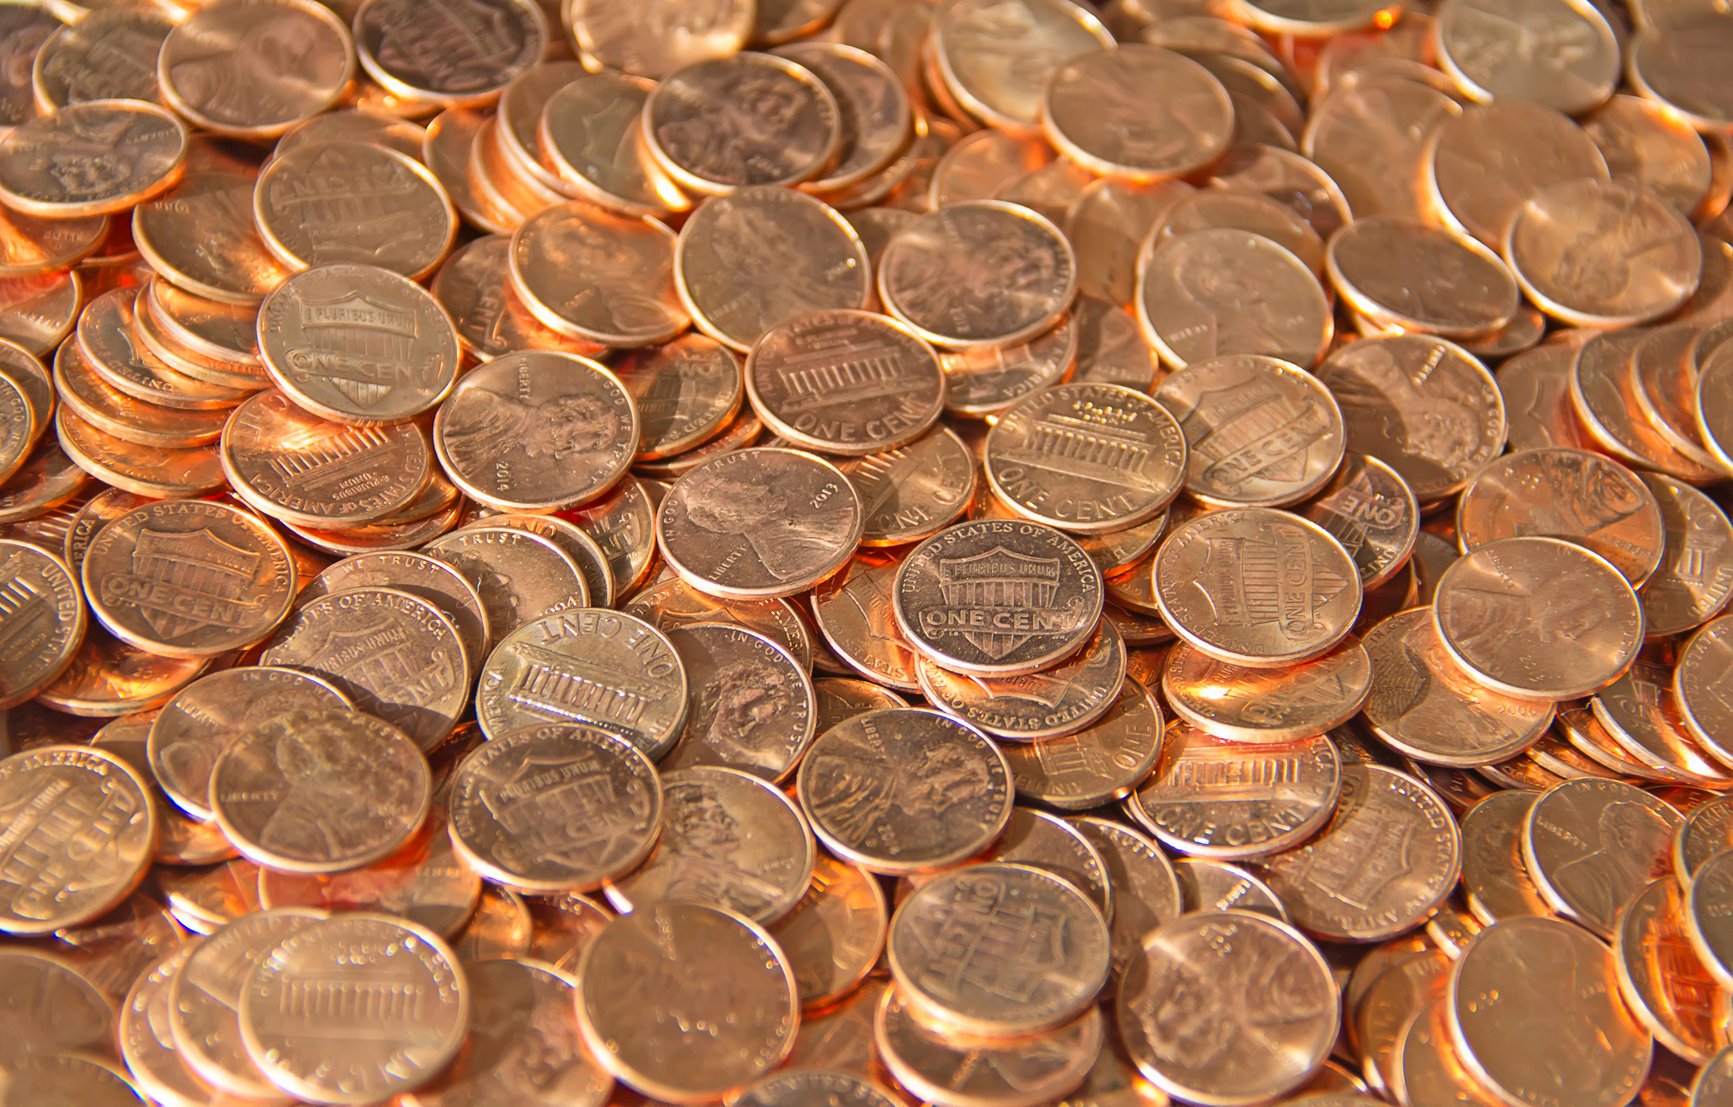 Lincoln Restaurant Will Remove Nearly $10,000 in Pennies From Its Floor